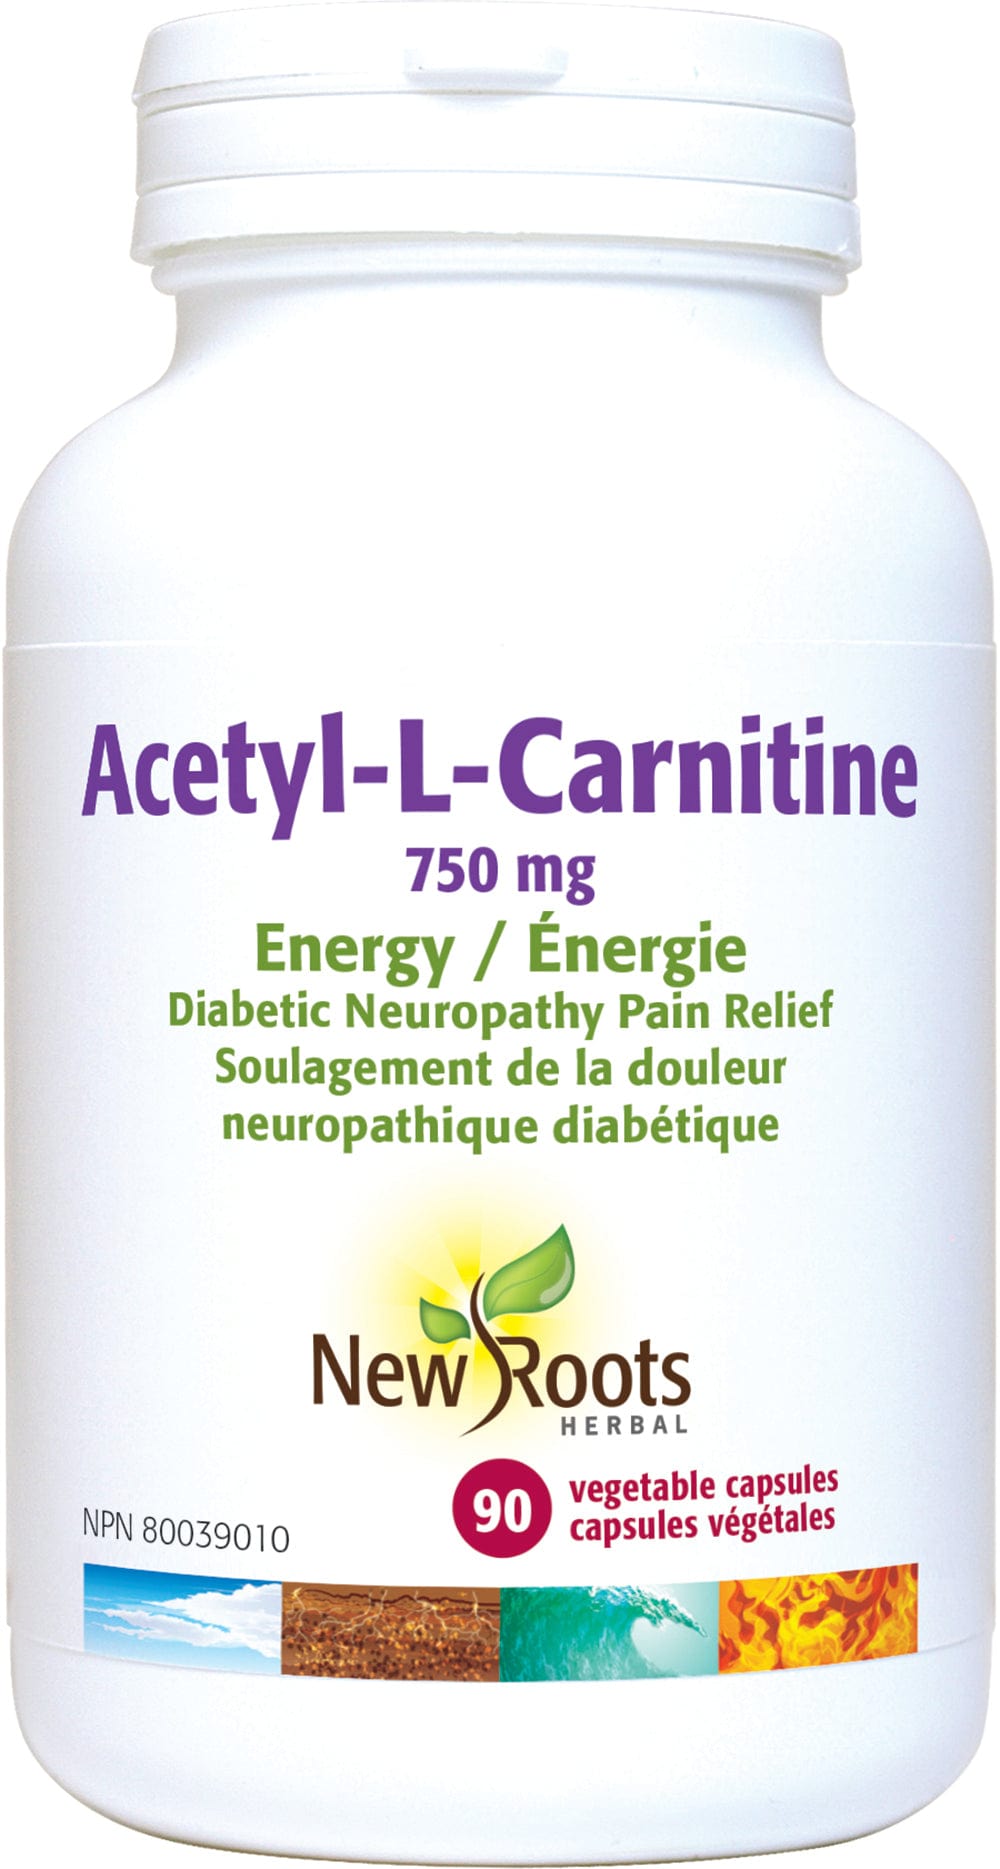 NEW ROOTS HERBAL Suppléments N-Acetyl-l-Carnitine 750mg 90vcaps